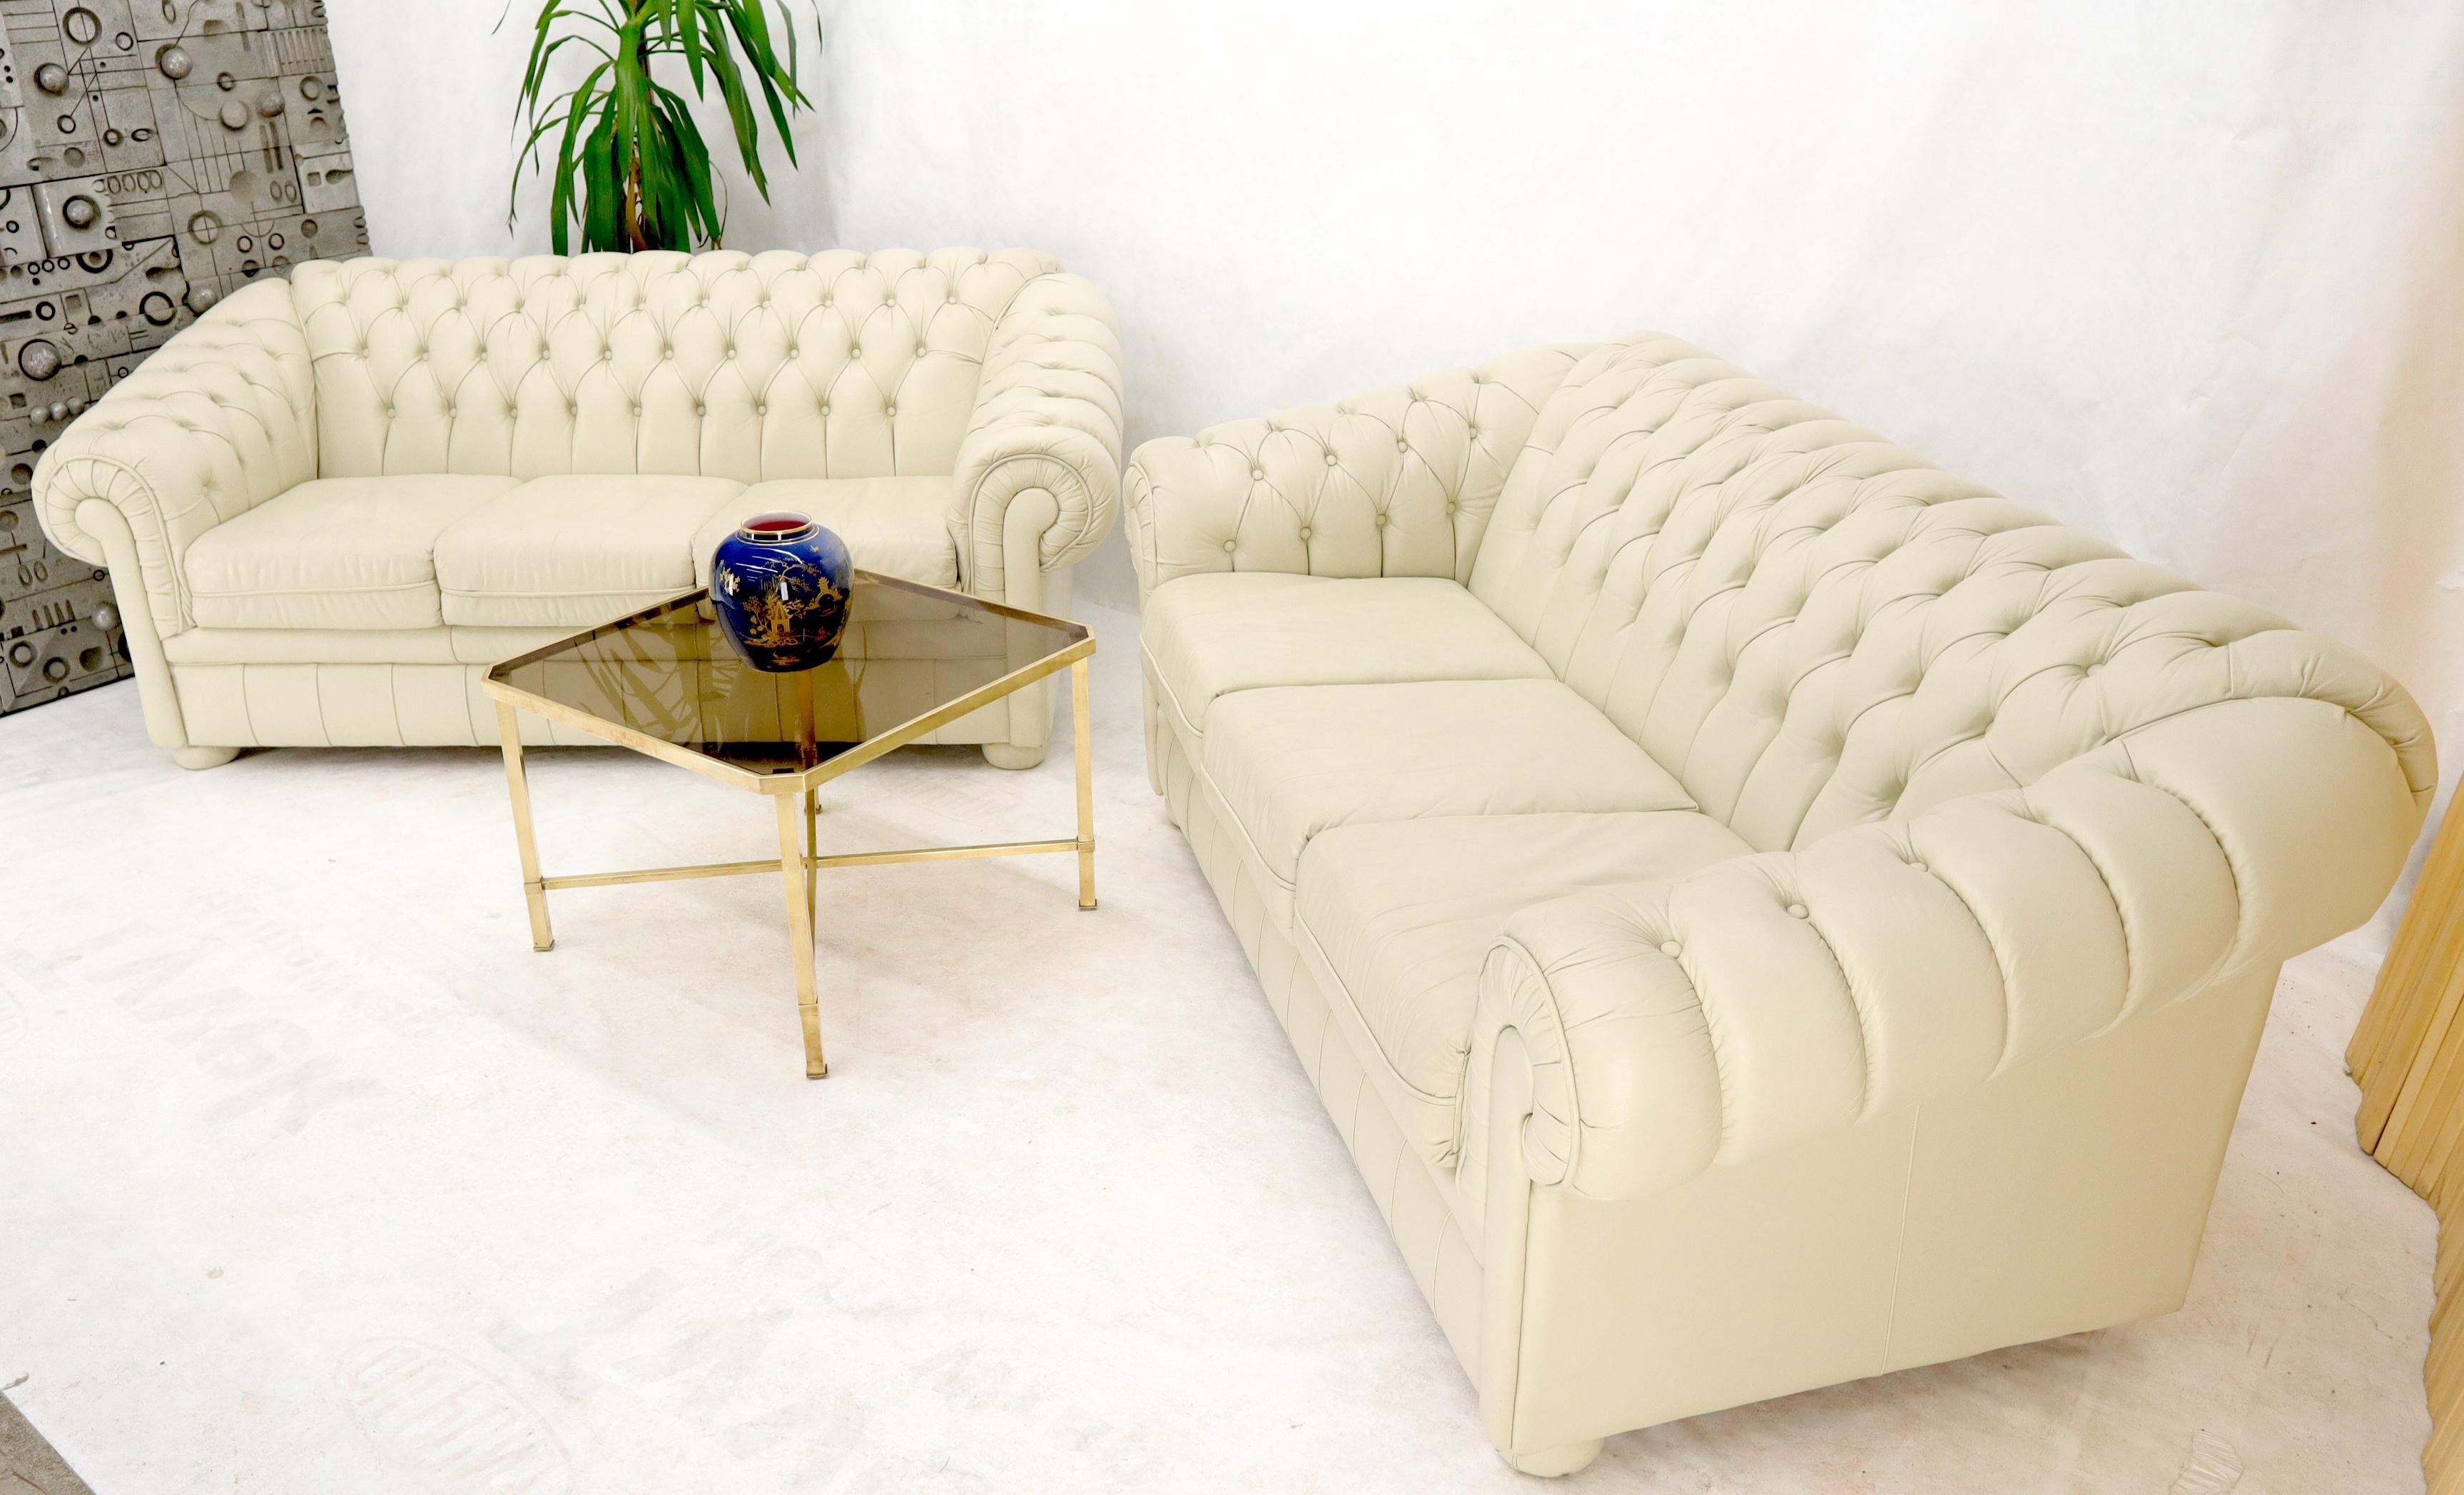 Pair of Off-White Leather Upholstery Tufted Chesterfield Sofas Couches 6